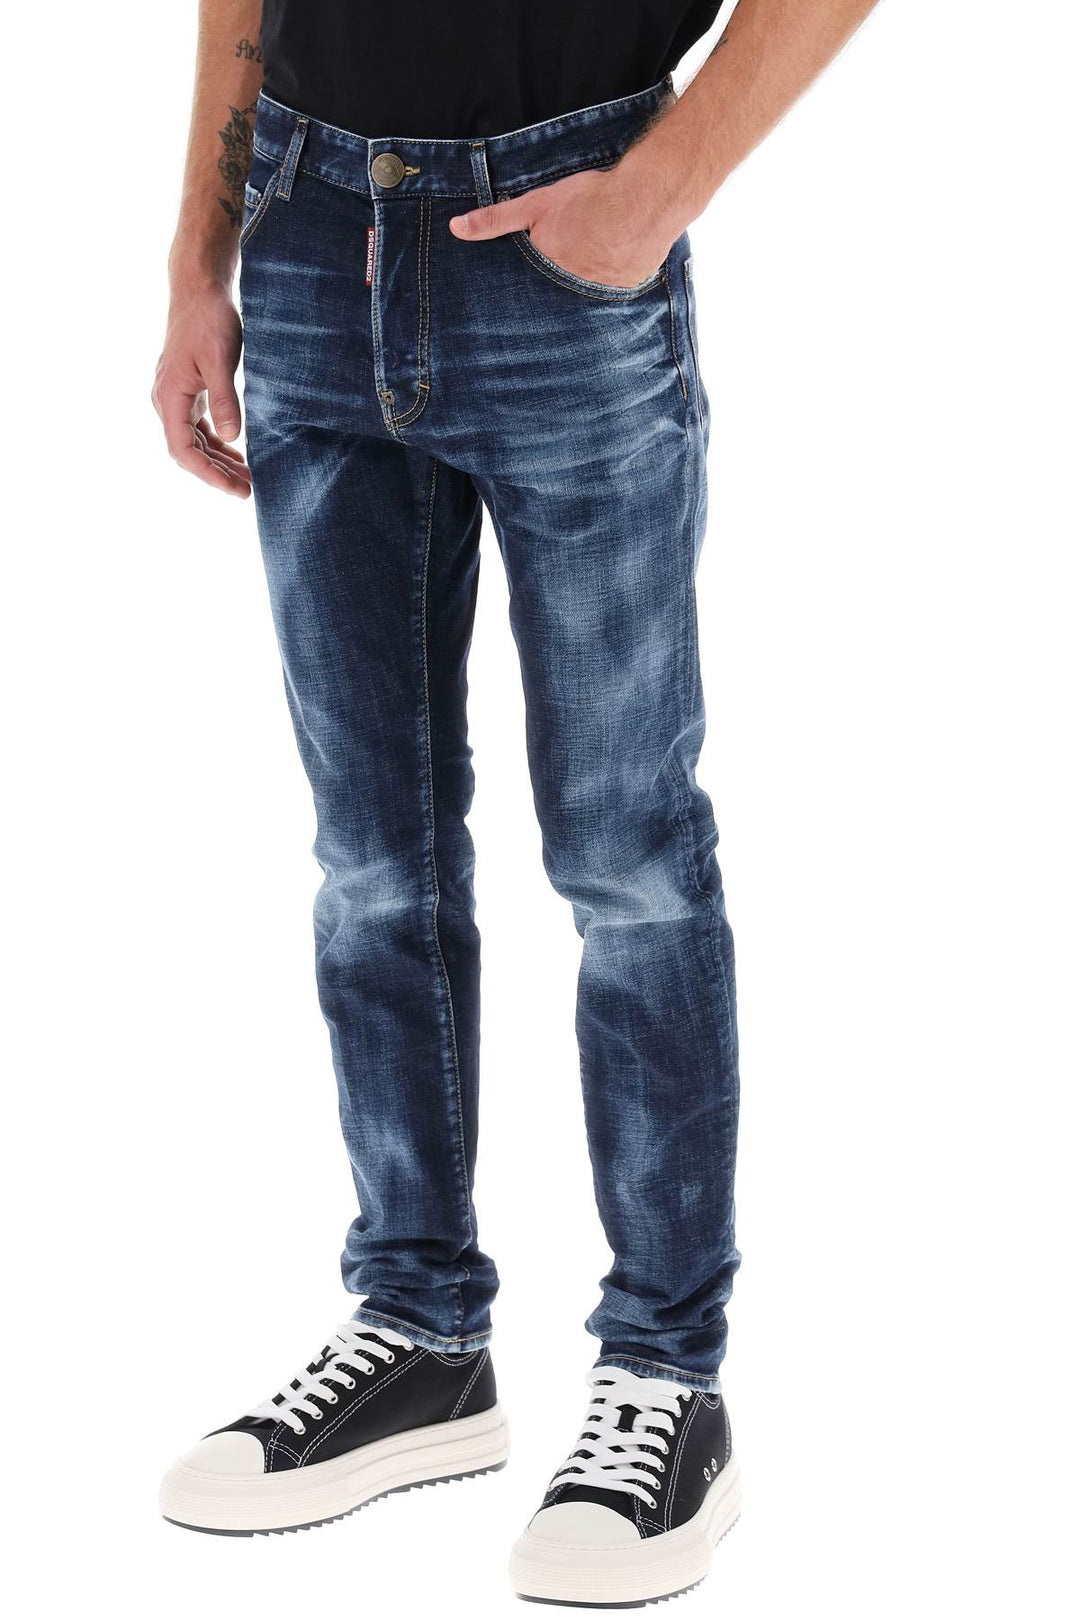 Jeans Cool Guy Dark Clean Wash - Dsquared2 - Uomo